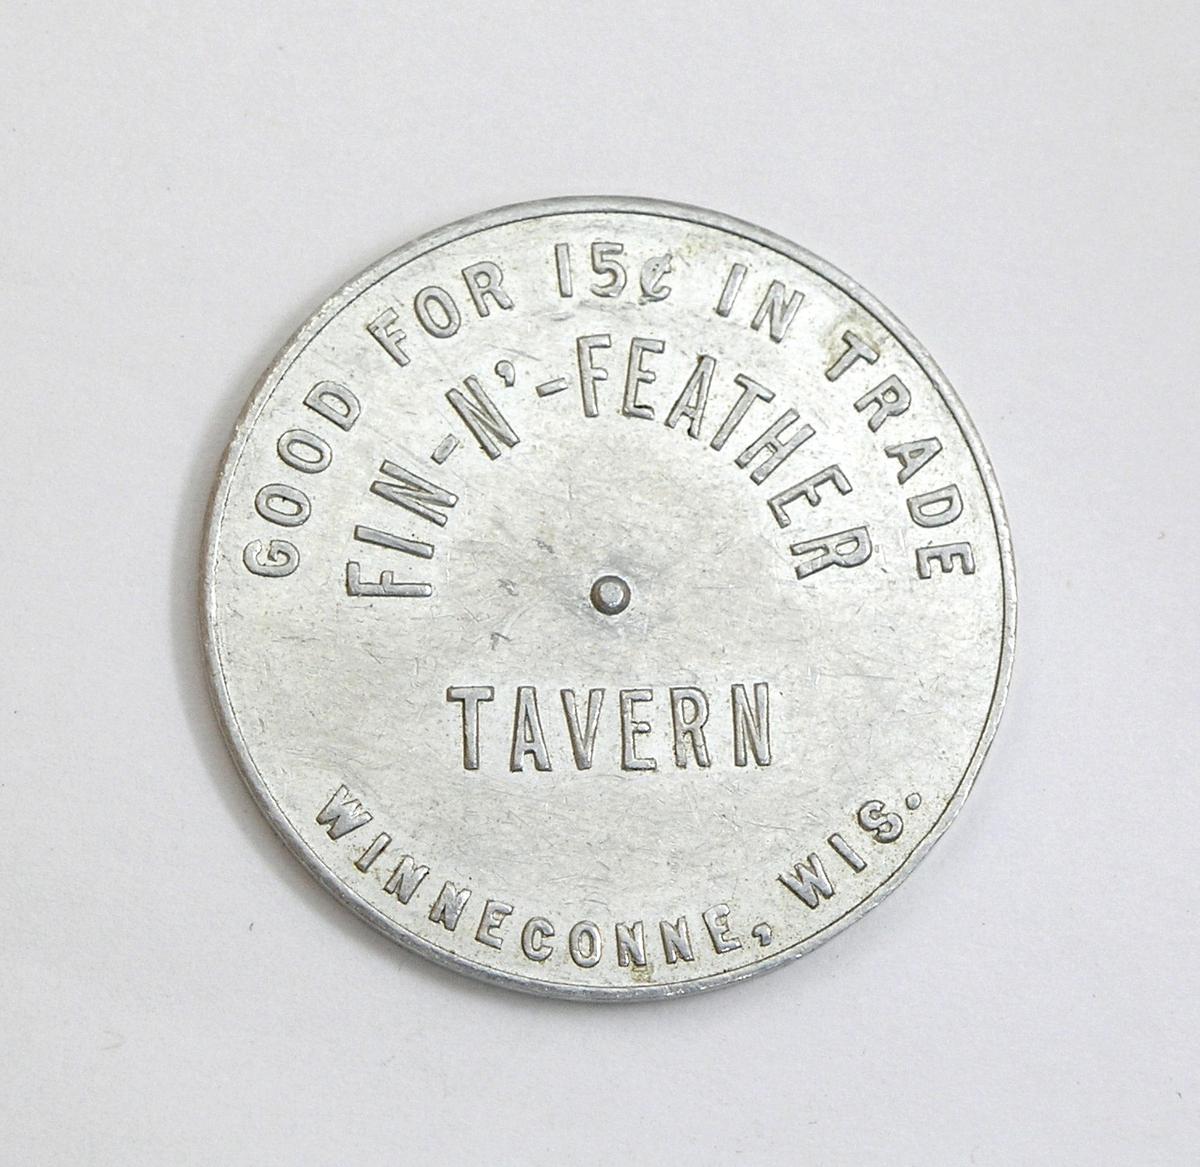 Vintage Aluminum Fin-N-Feather Tavern Spinner Coin/Token. "Good For 15-Cent